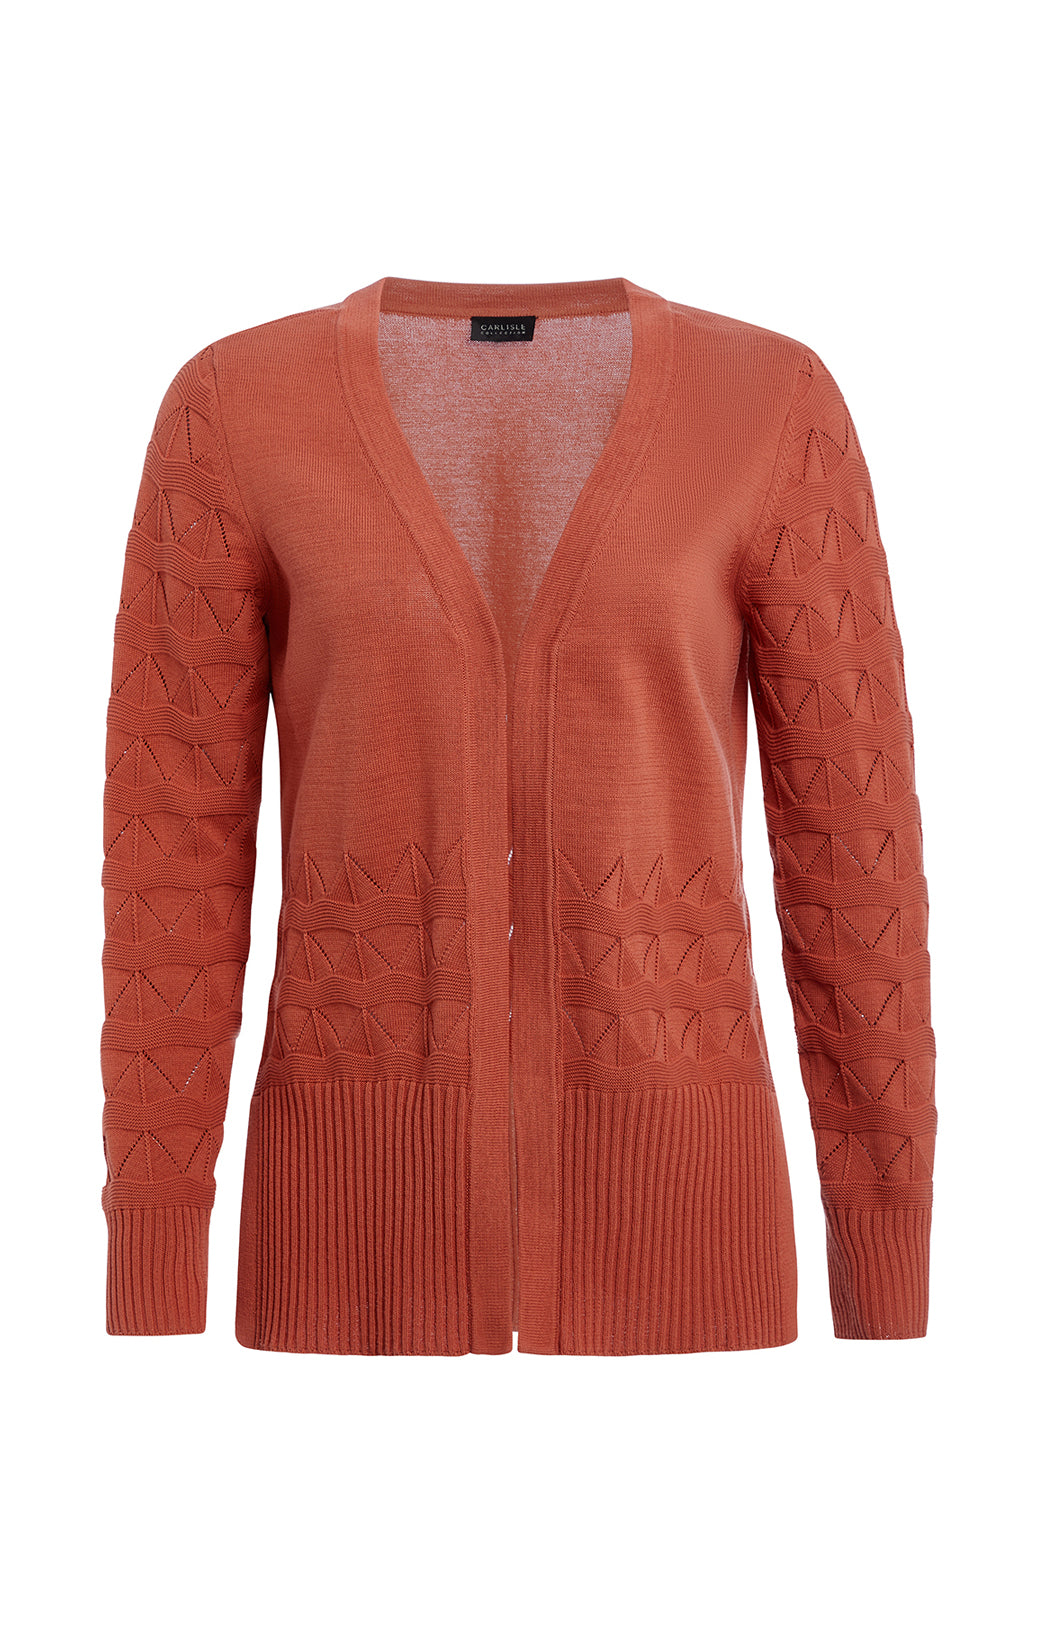 Turron-Shell - Silk-Enriched Knit Shell - Product Image